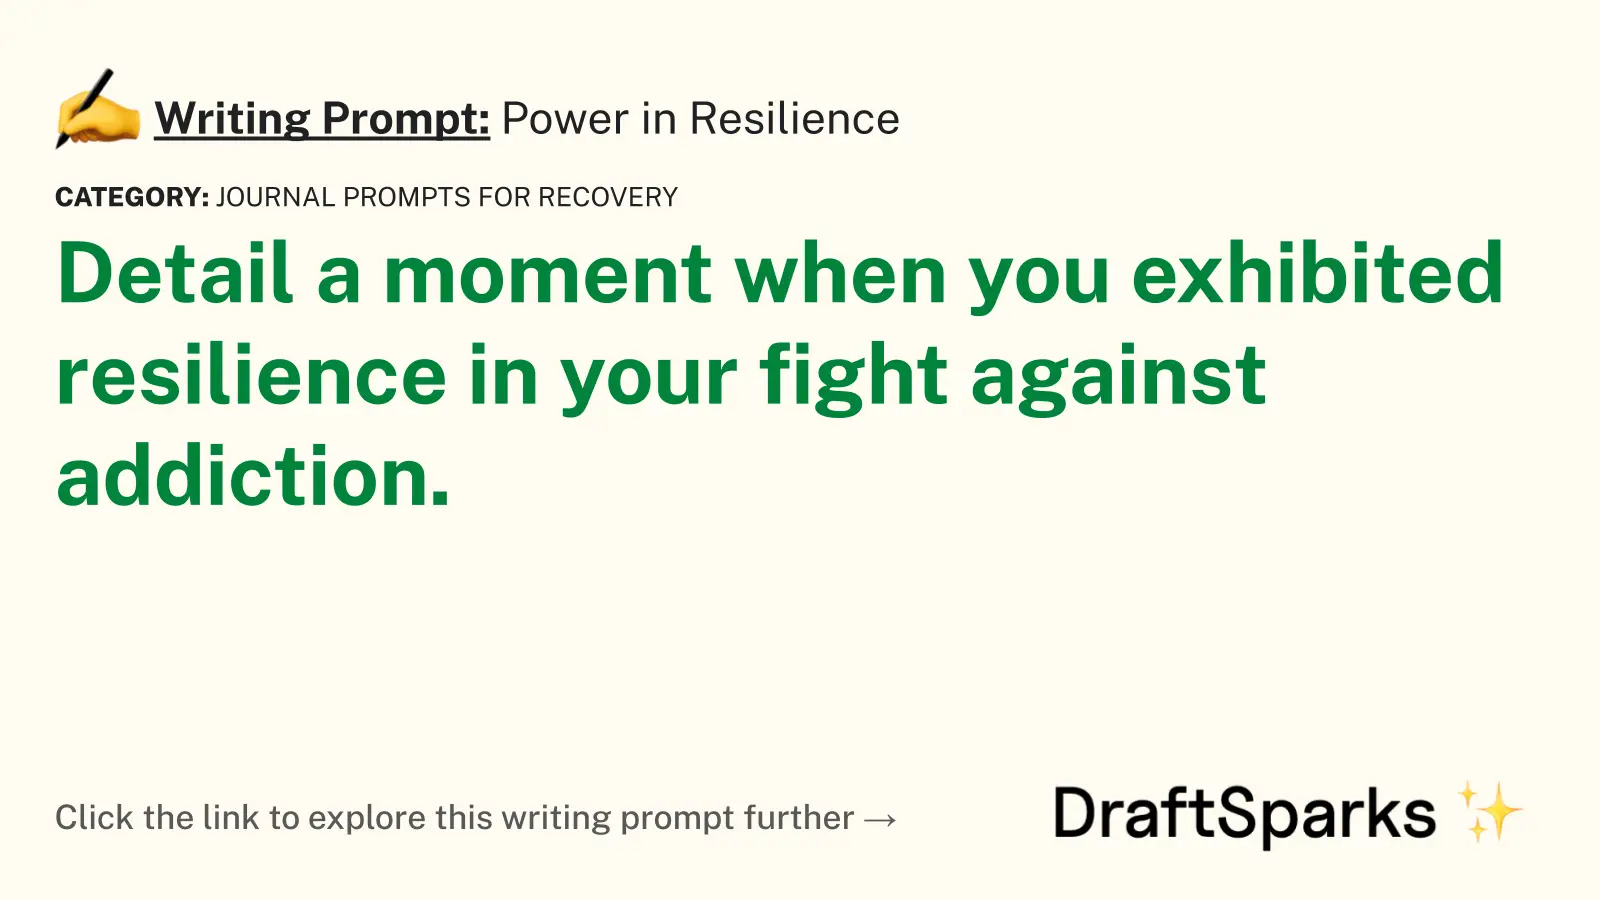 Power in Resilience